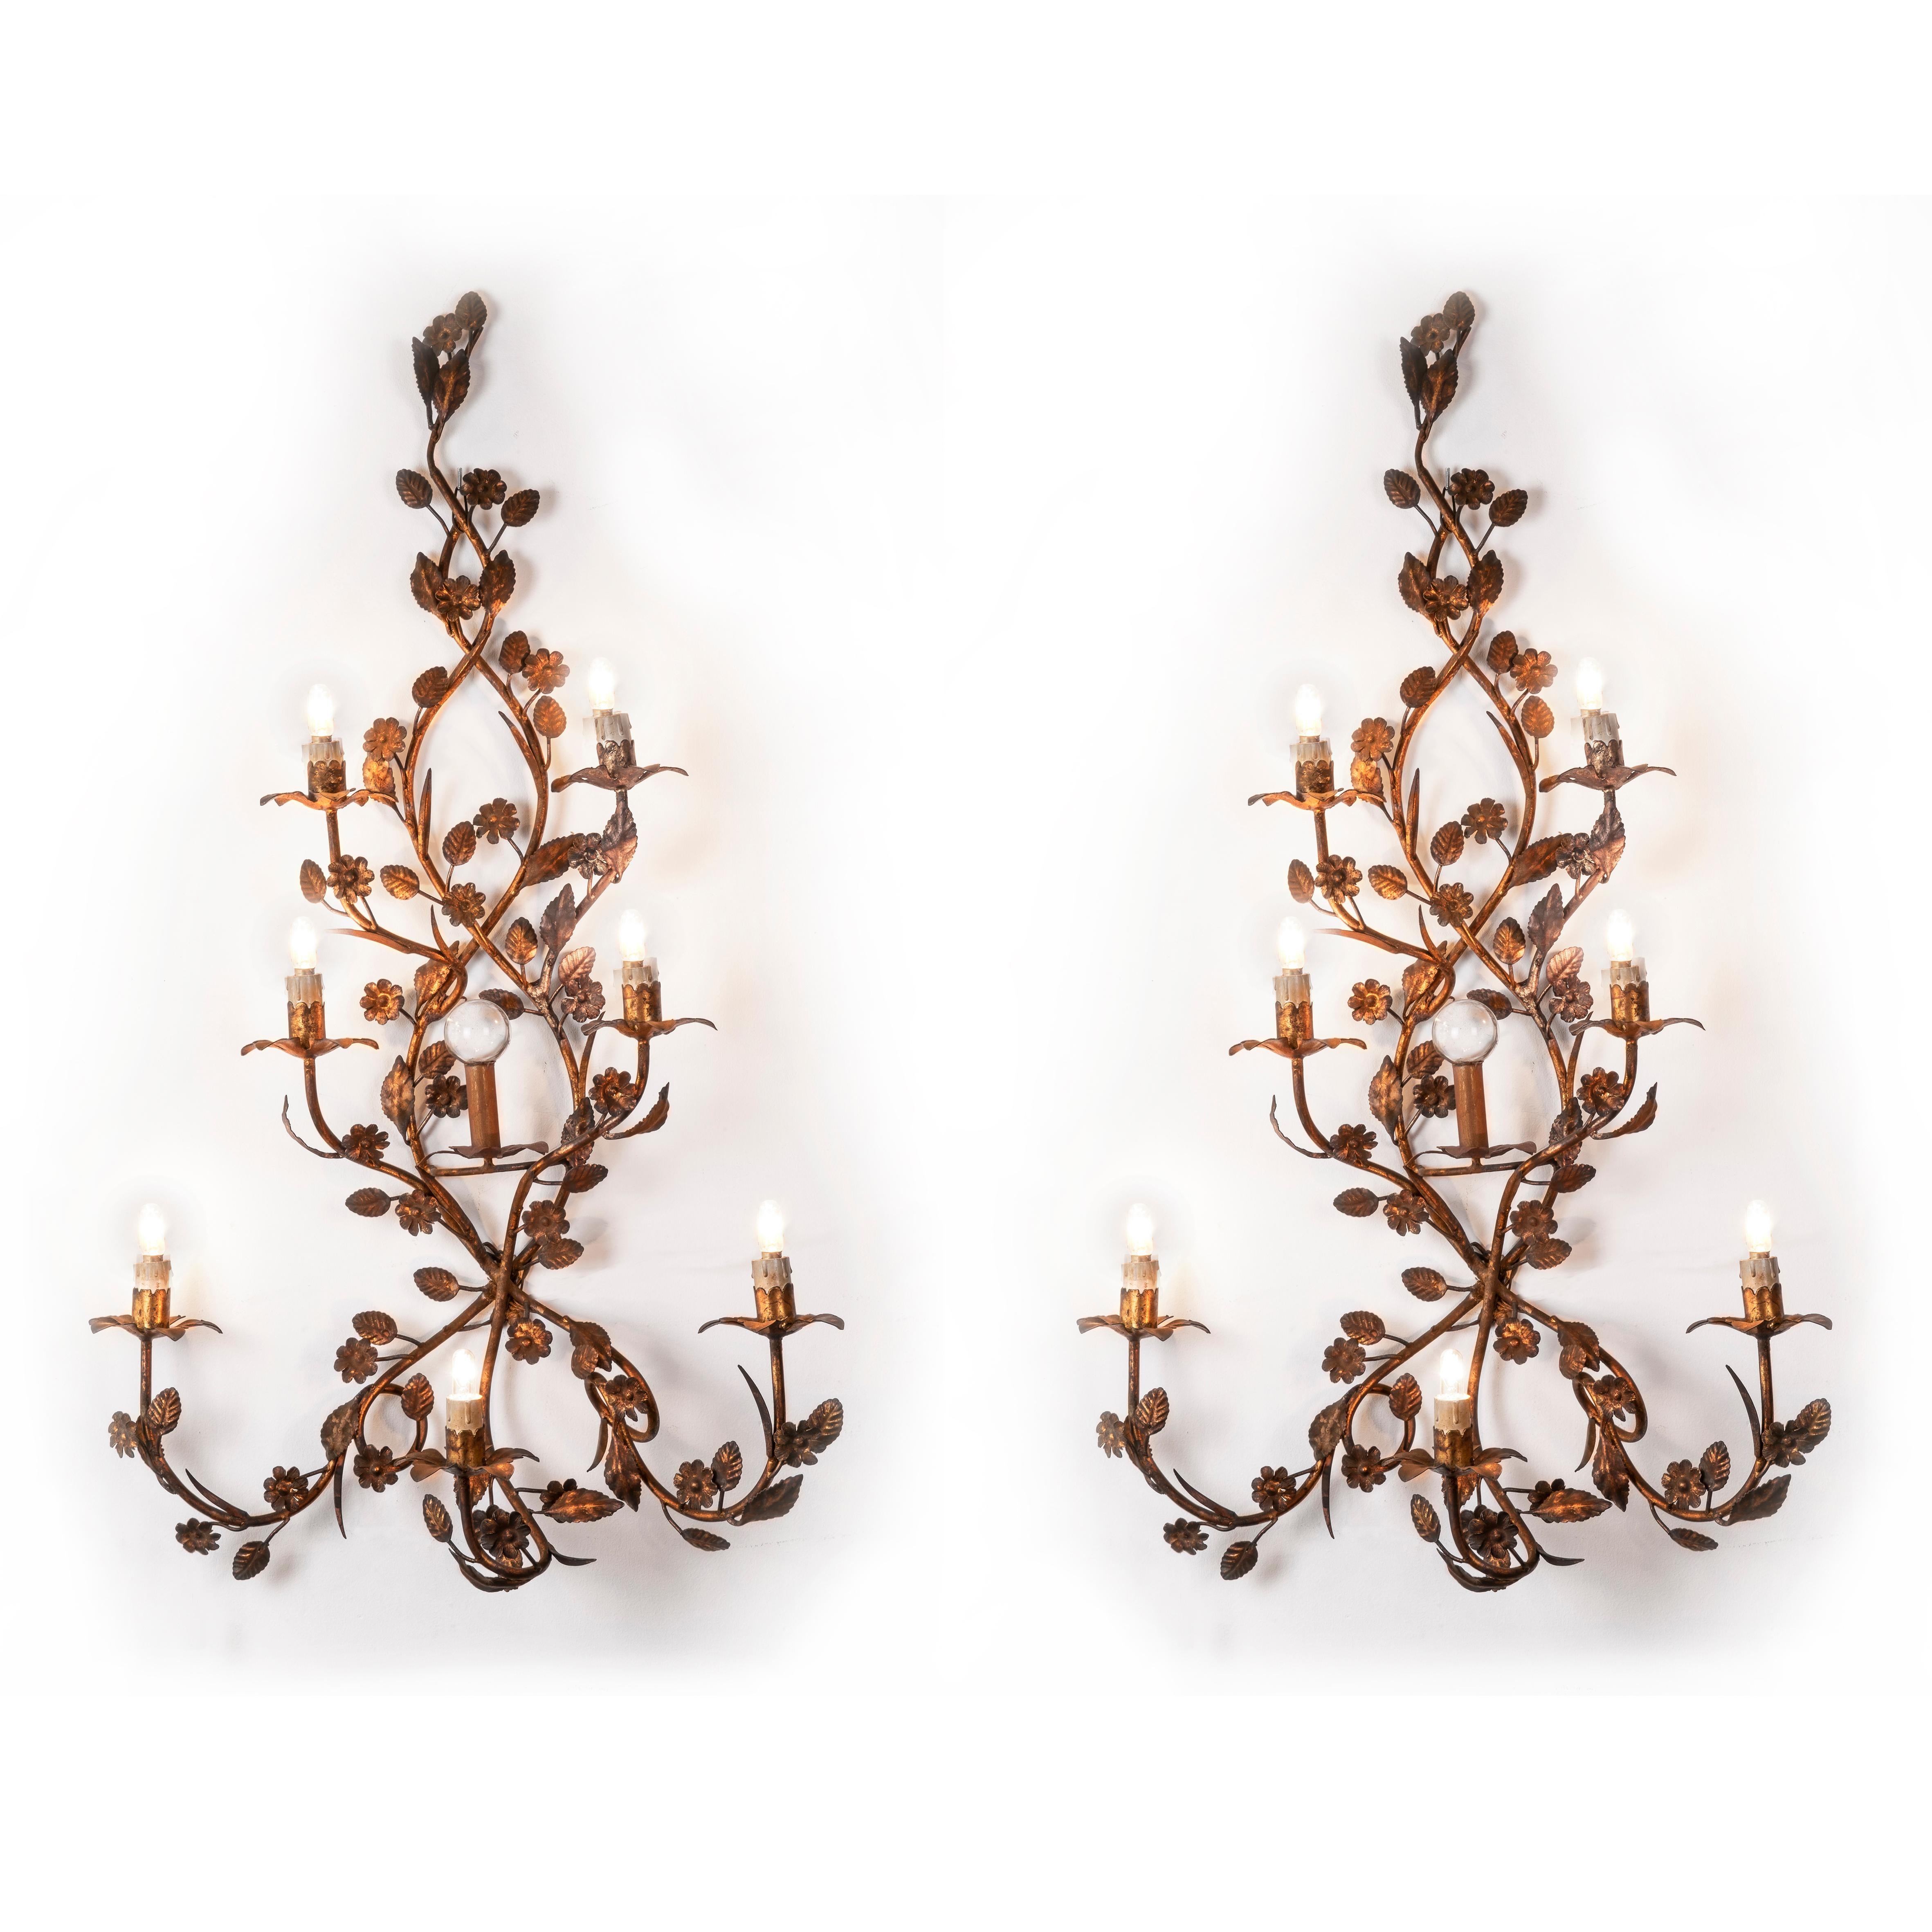 Pair of antique seven-light wrought iron wall lights dating back to the mid-20th century, consisting of two wrought iron branches, decorated with flowers and leaves, creating a slight pyramidal structure.
The seven curved arms ending with floral